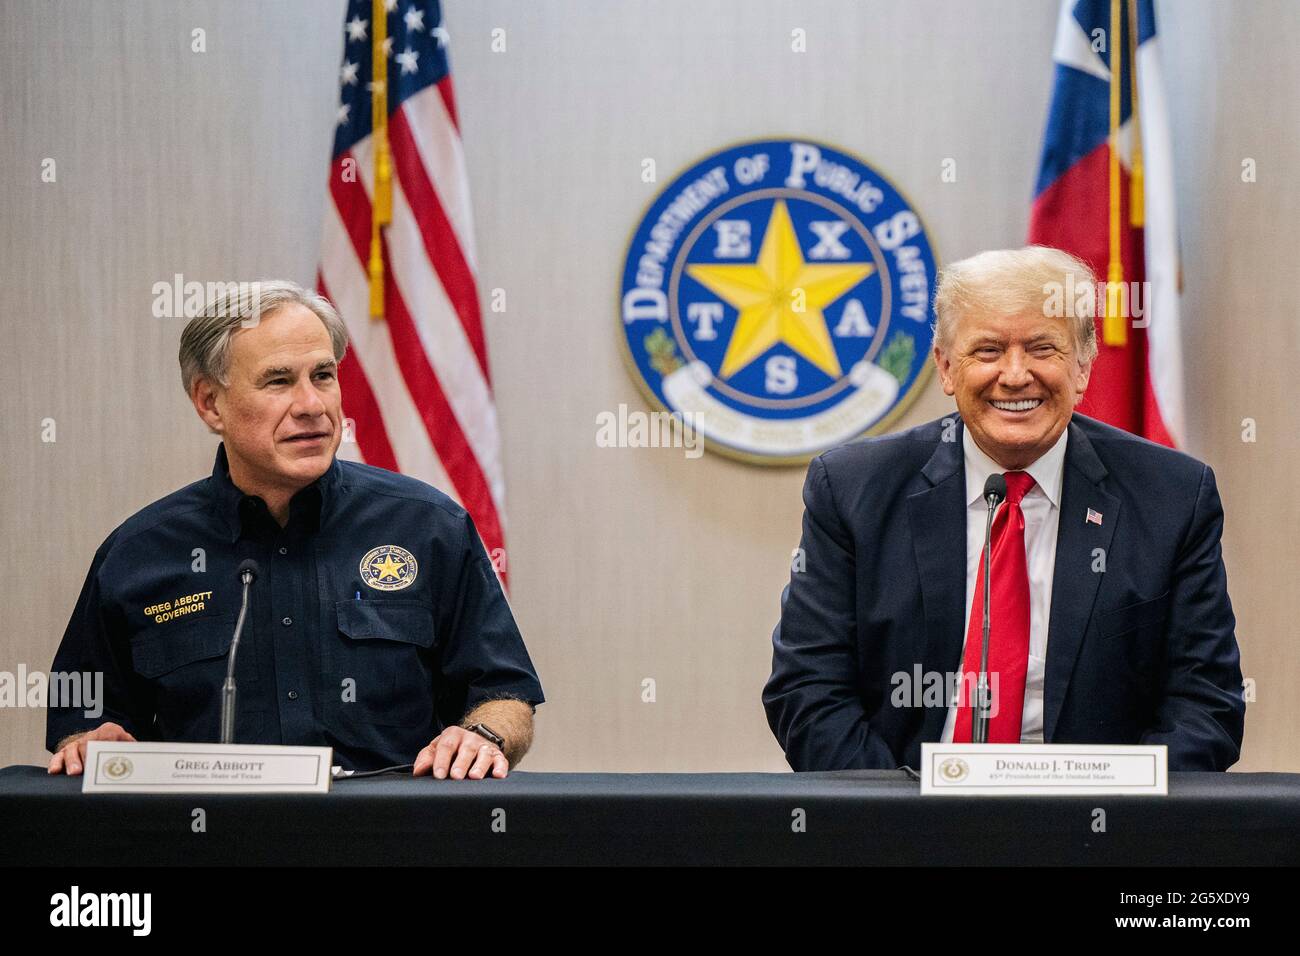 Weslaco Texas USA, June 30: Texas Gov. GREG ABBOTT and former President DONALD TRUMP attend a border security briefing to discuss further plans in securing Texas's border with Mexico. Gov. Abbott has pledged to build a state-funded border wall between Texas and Mexico as a surge of mostly Central American immigrants crossing into the United States has challenged U.S. immigration agencies. So far in 2021, U.S. Border Patrol agents have apprehended more than 900,000 immigrants crossing into the United States on the southern border. (Pool Photo/ Brandon Bell) Credit: Bob Daemmrich Photography Stock Photo